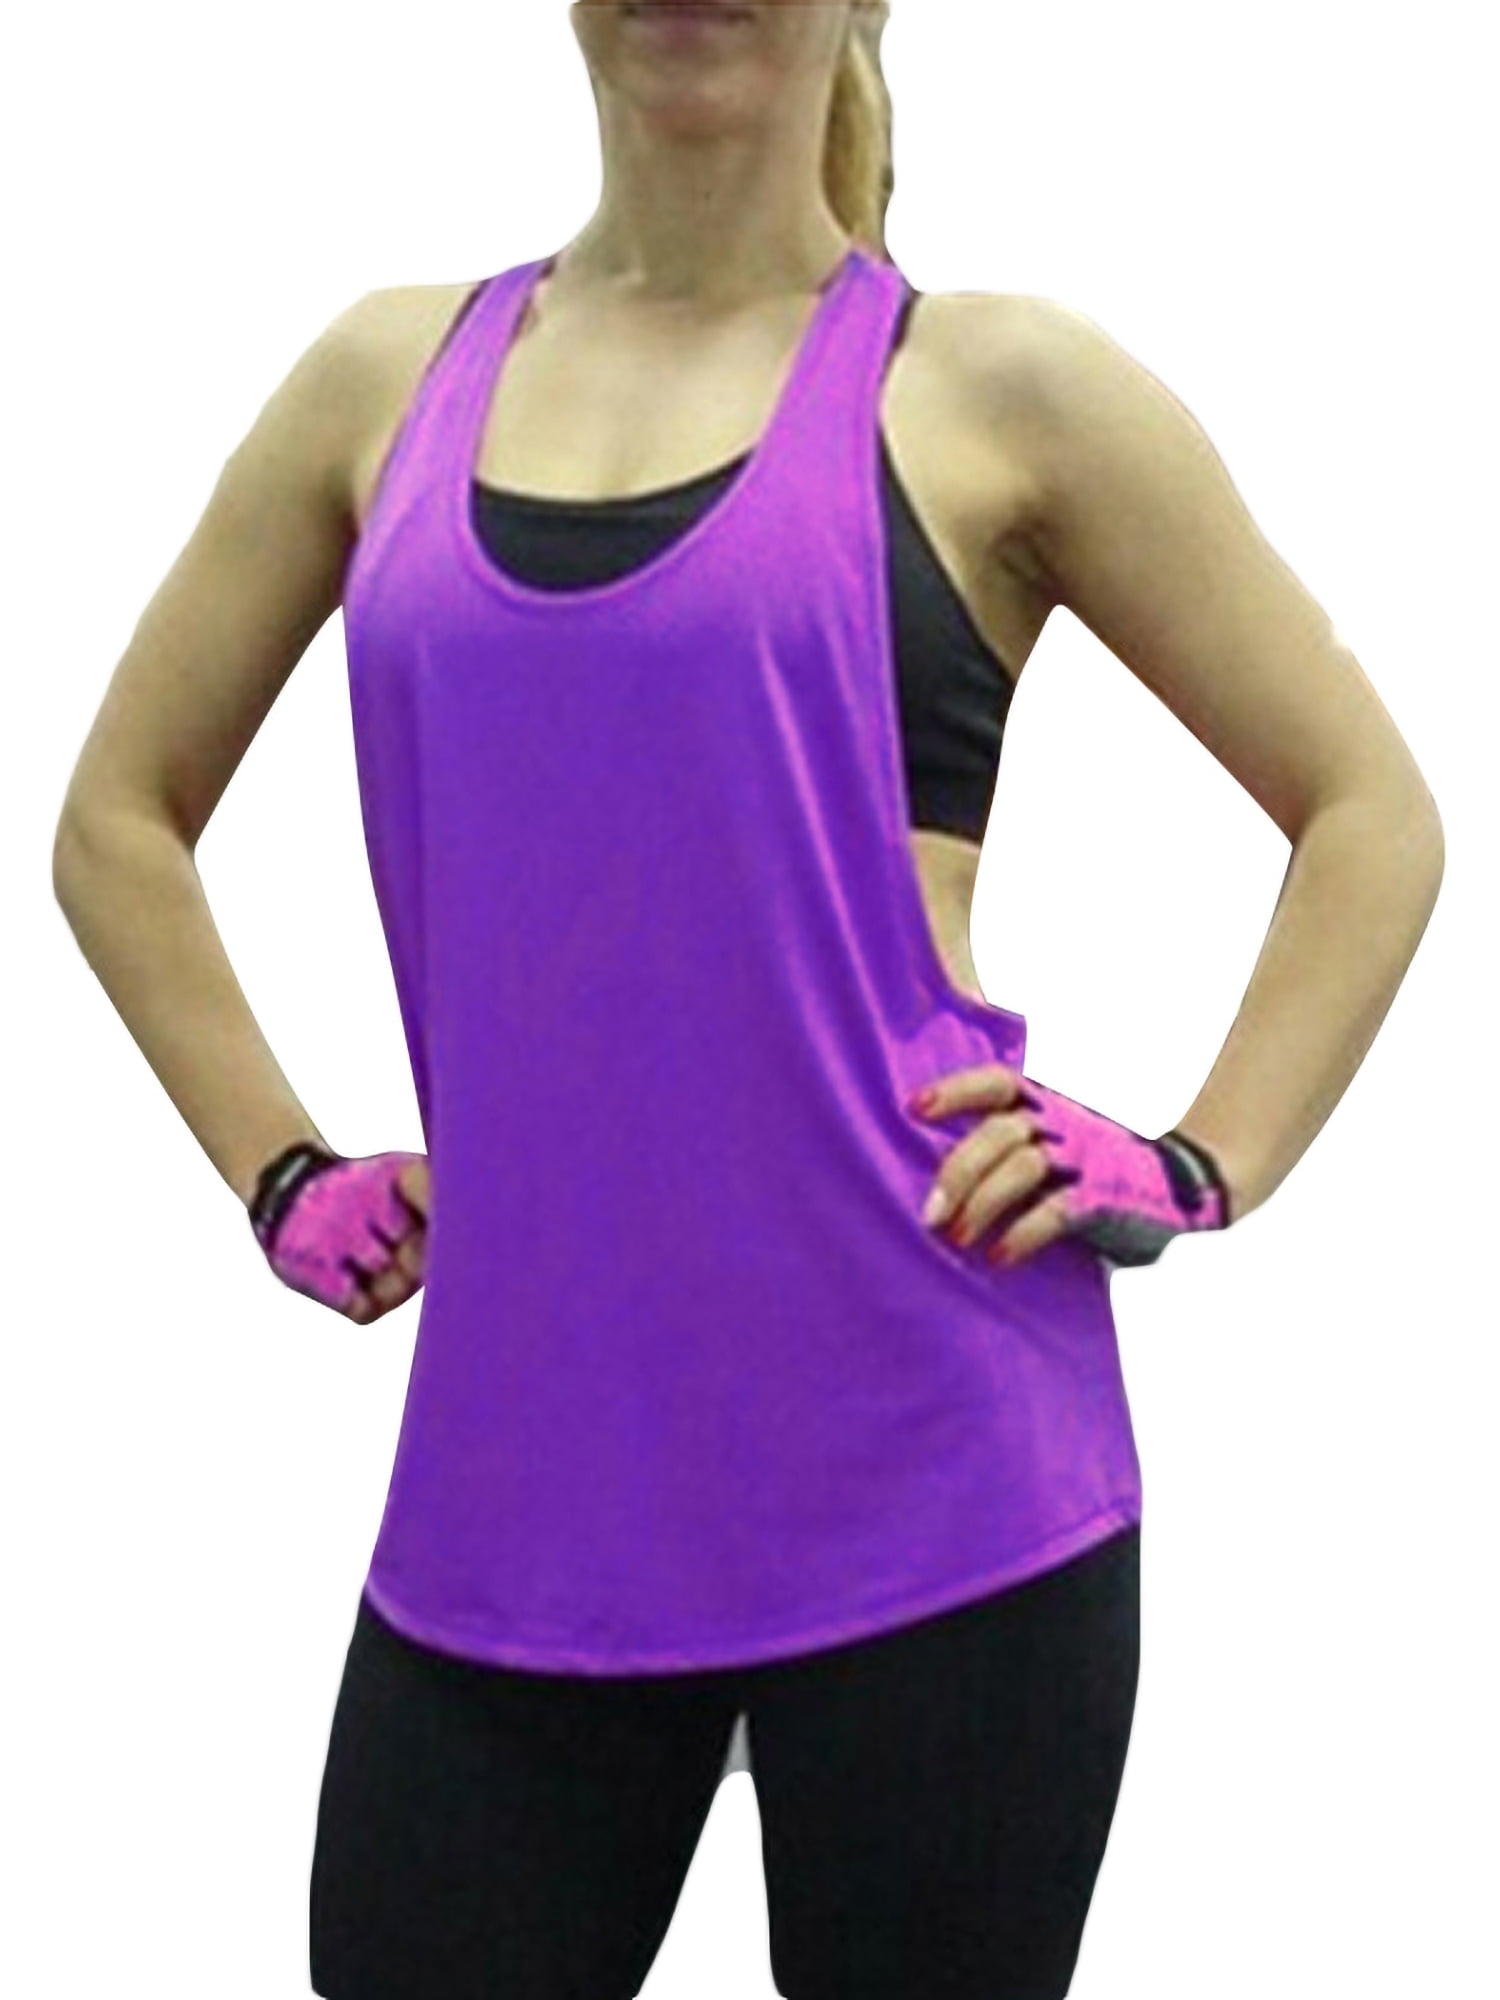 FAFAIR Workout Top With Bra Gym Tank Top Women Loose Racerback Yoga Vest Tops Running Athletic Shirts 